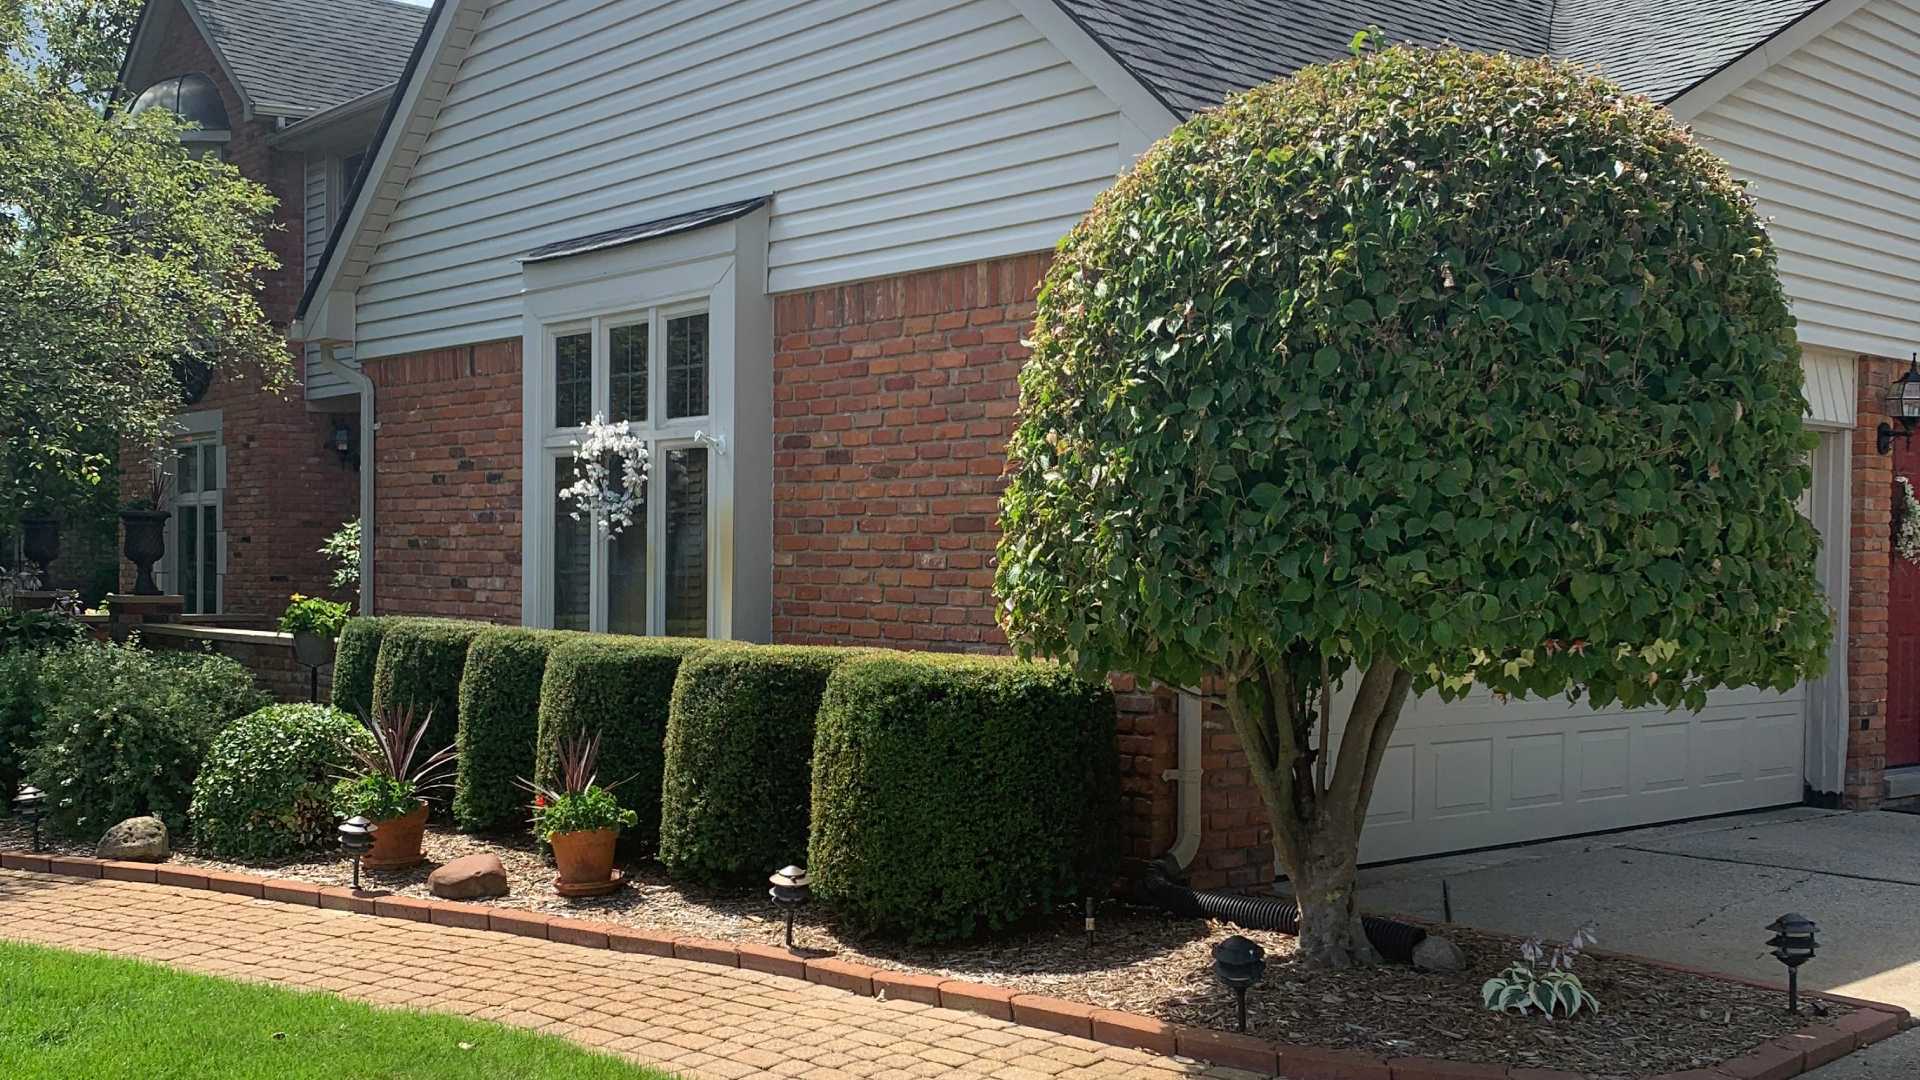 Maintained shrubs in landscape bed for home front in Harrison Township, MI.